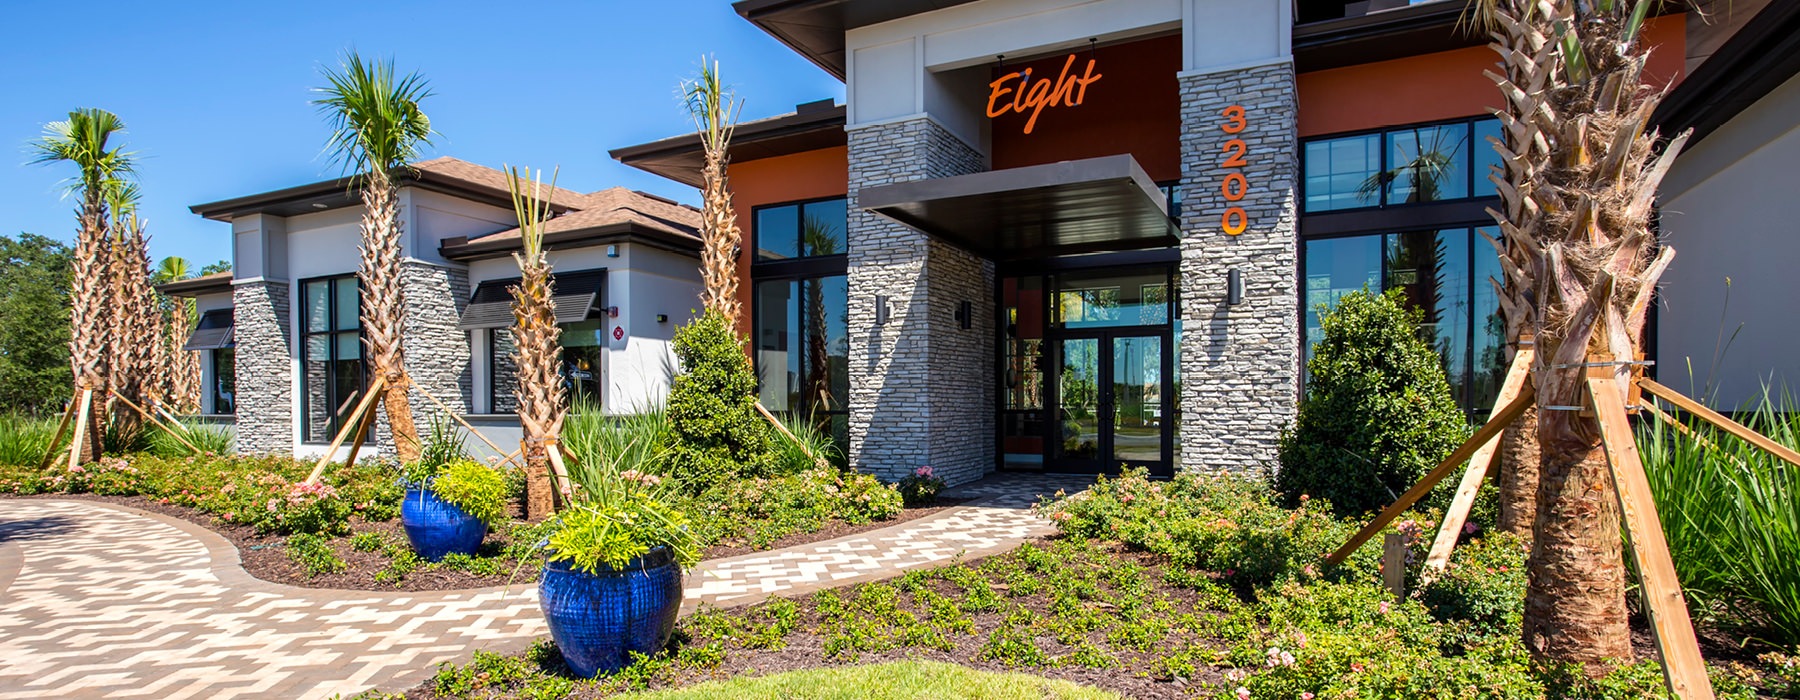 Eight entrance with lush landscaping